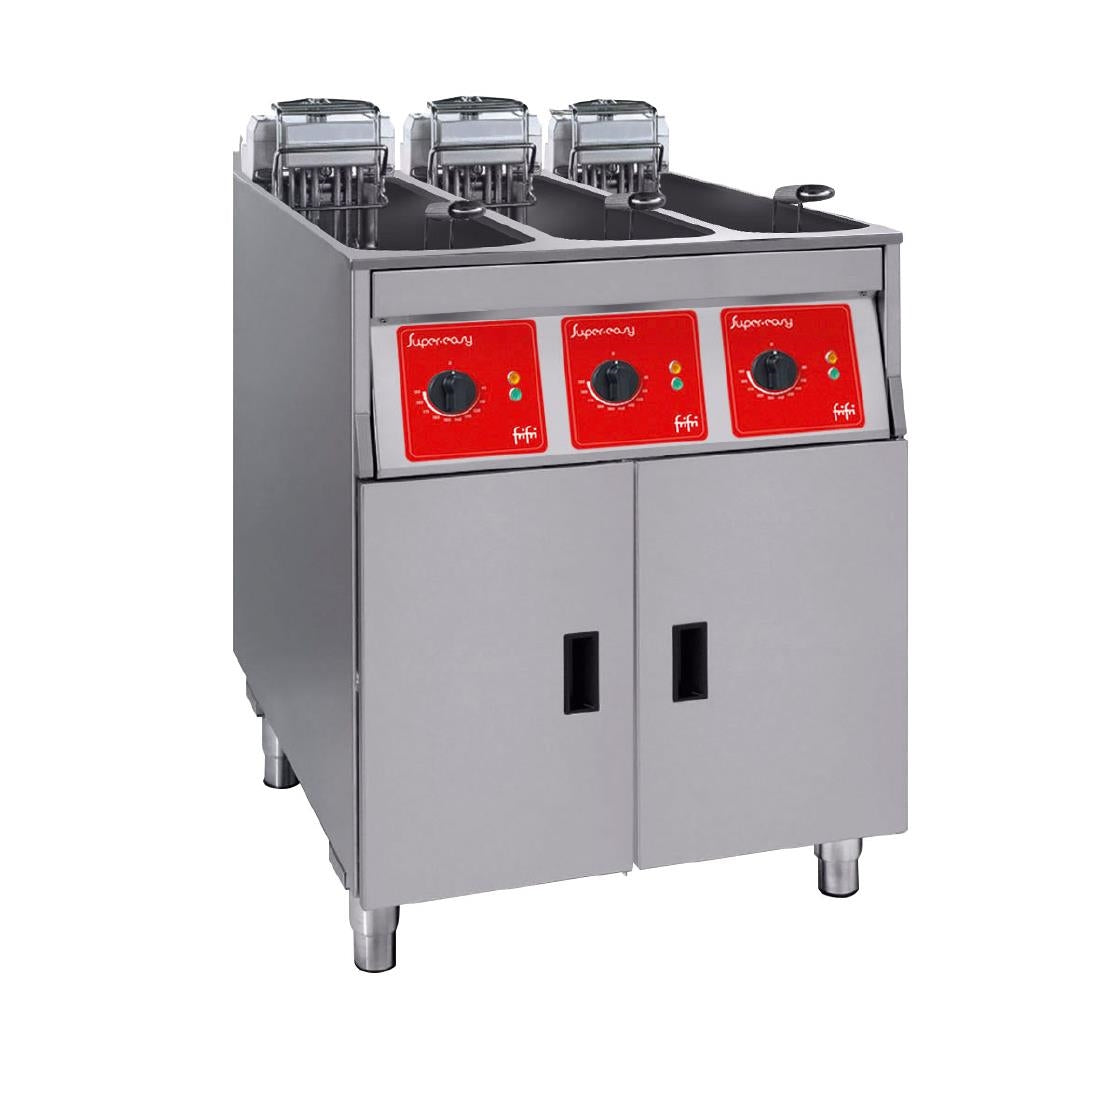 HS074-1PH FriFri Super Easy 633 Electric Free-standing Fryer Triple Tank Triple Basket with Filtration 3x7.5kW Single Phase